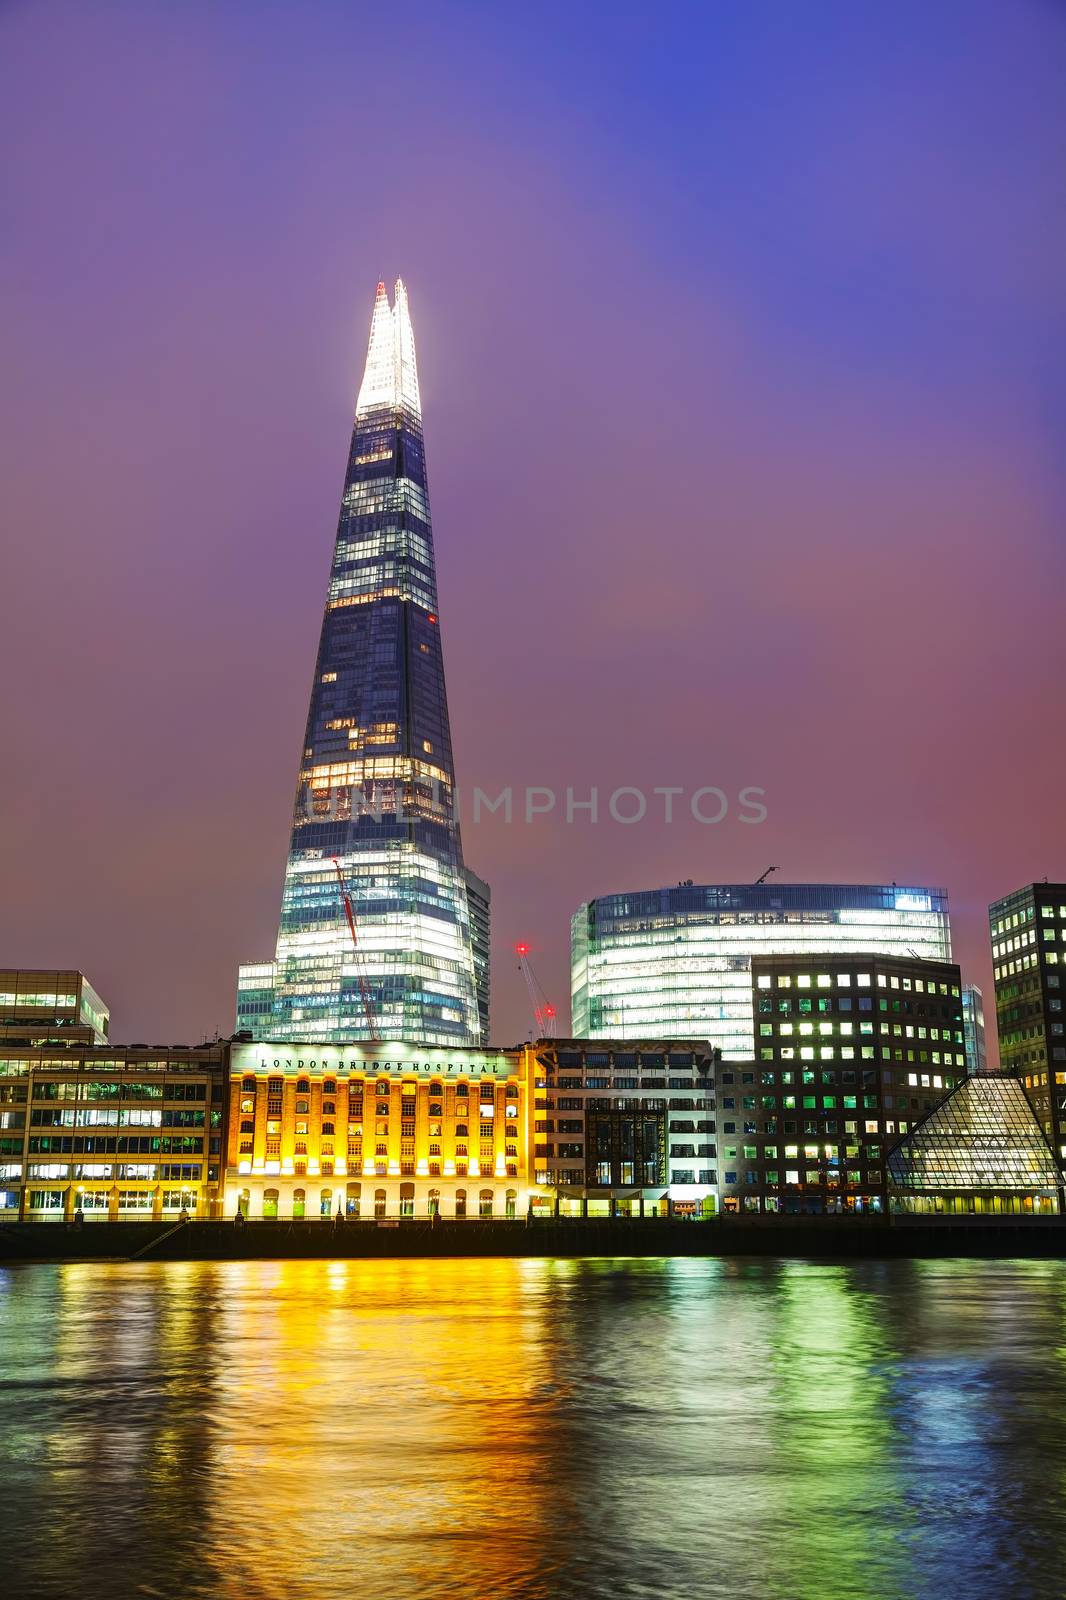 Overview of London with the Shard London Bridge by AndreyKr